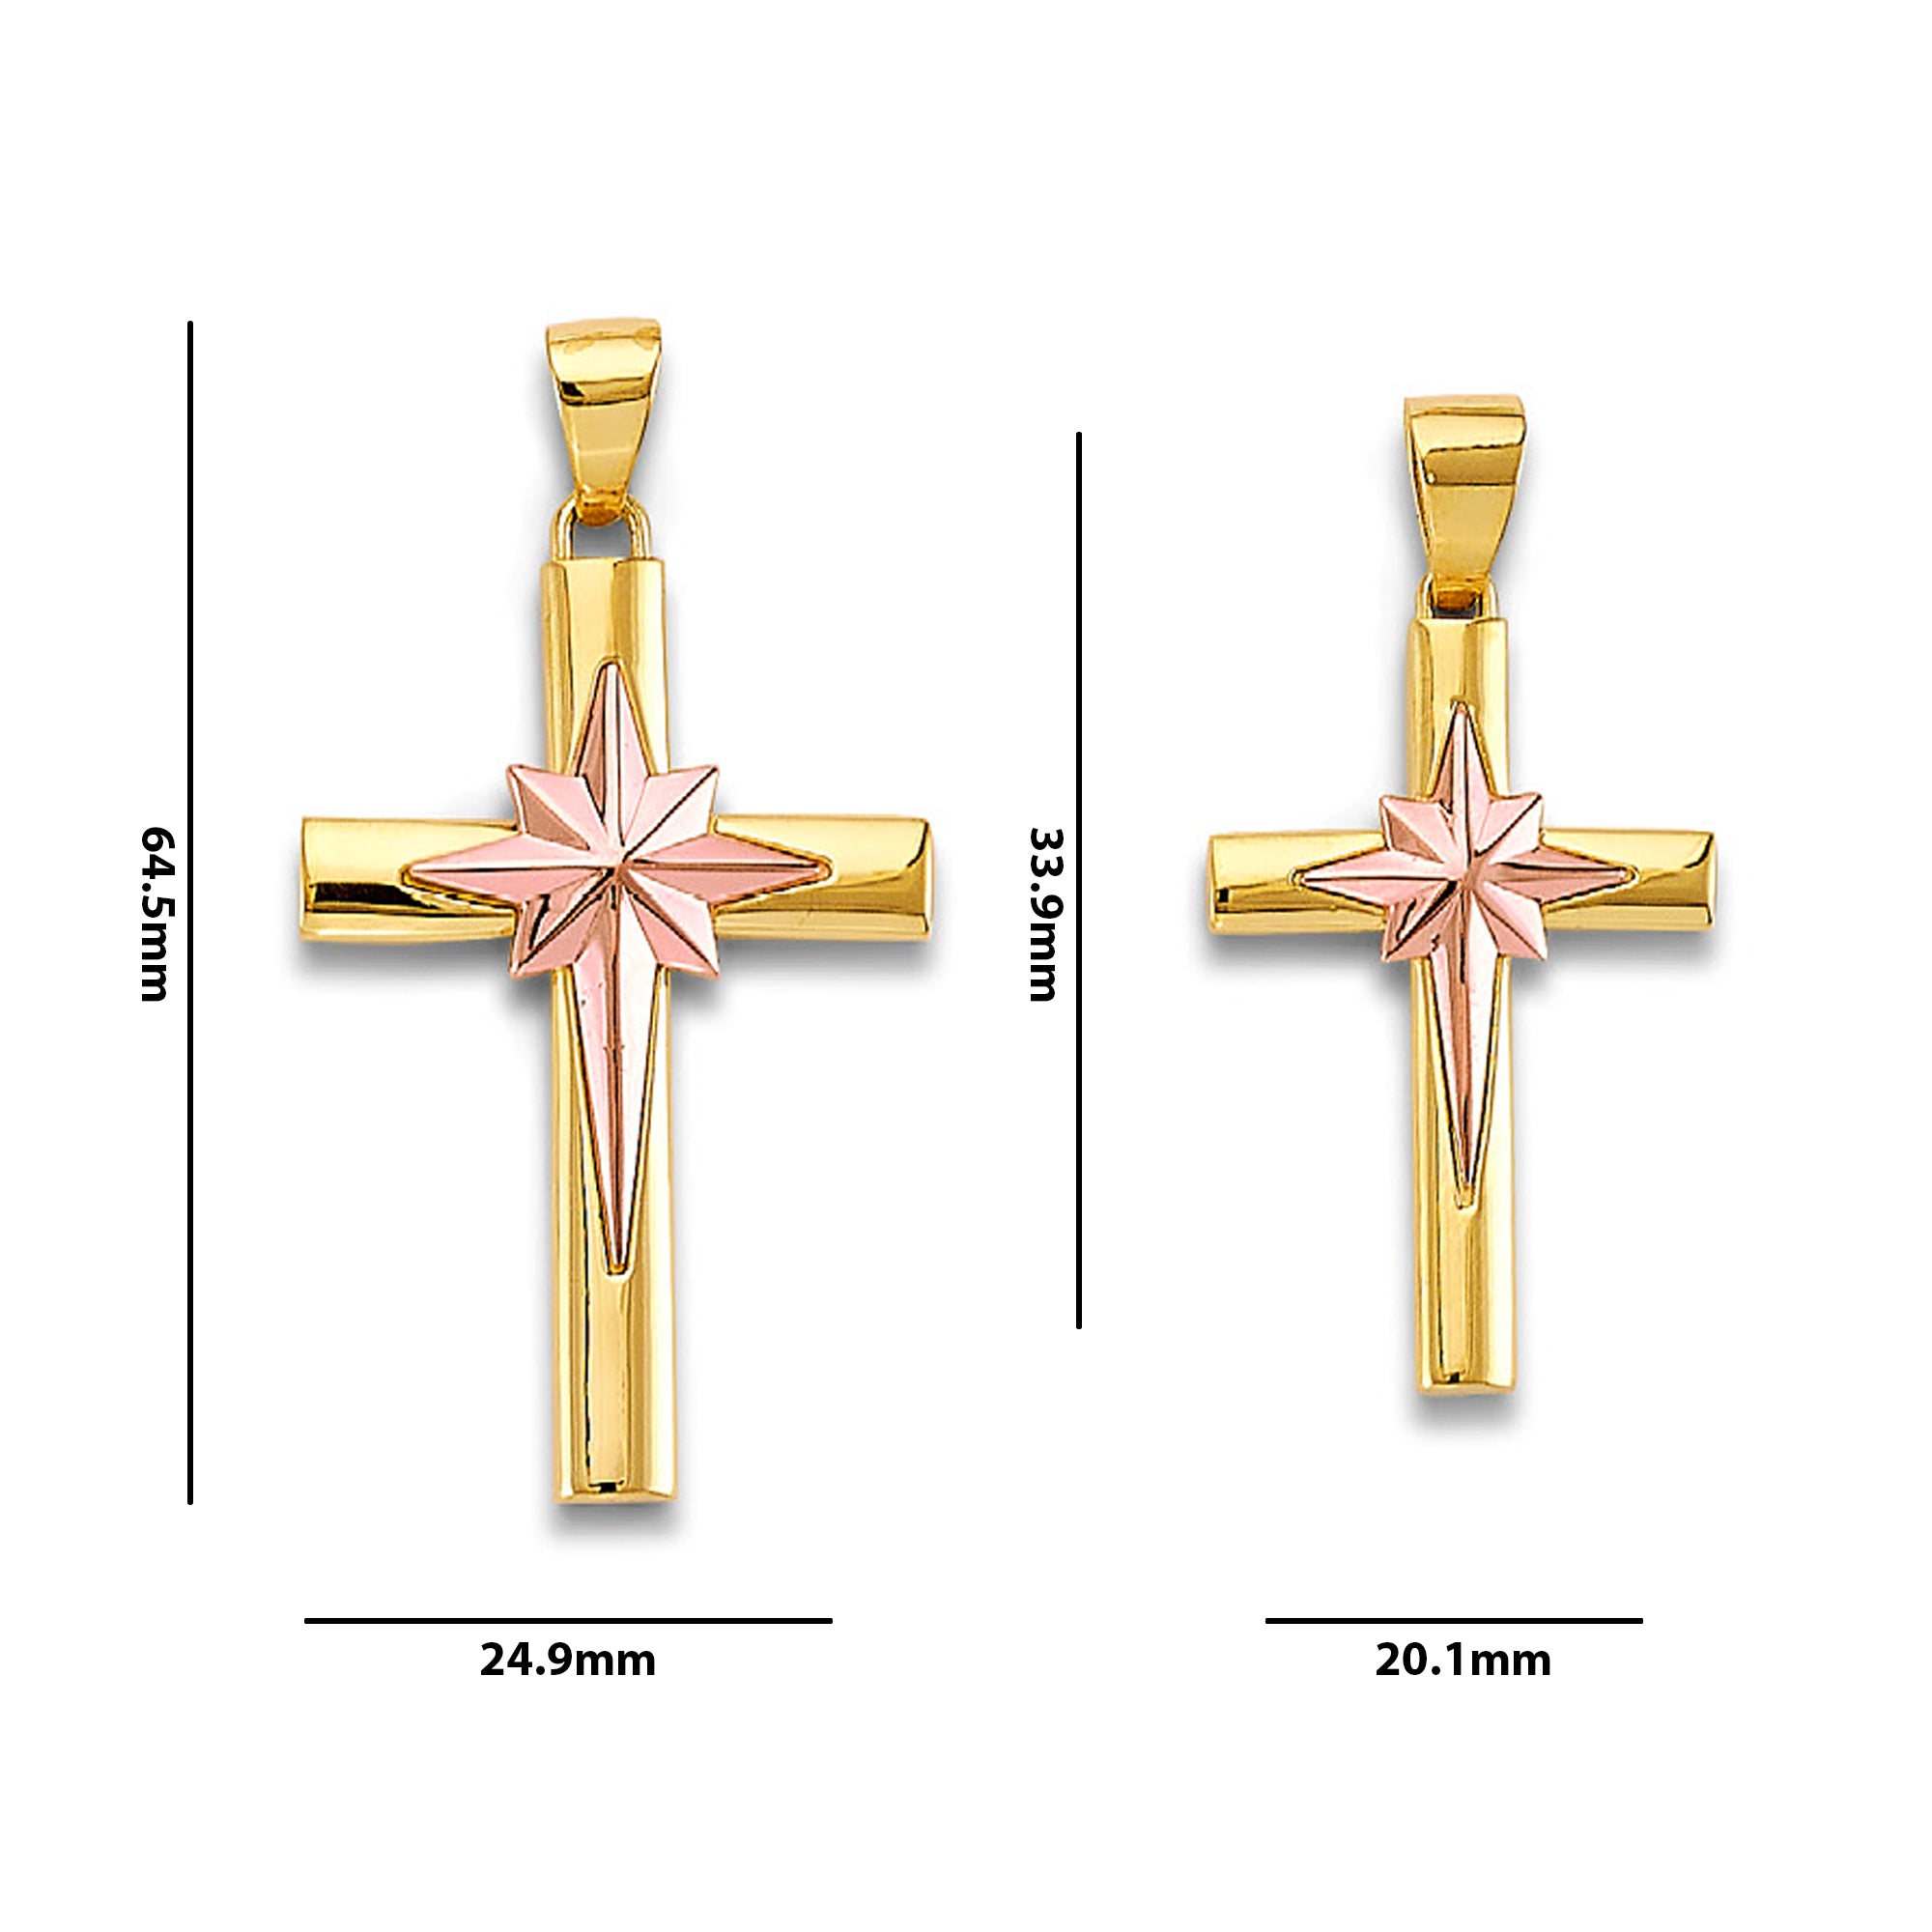 Two Tone Gold Guiding Star Cross Pendant